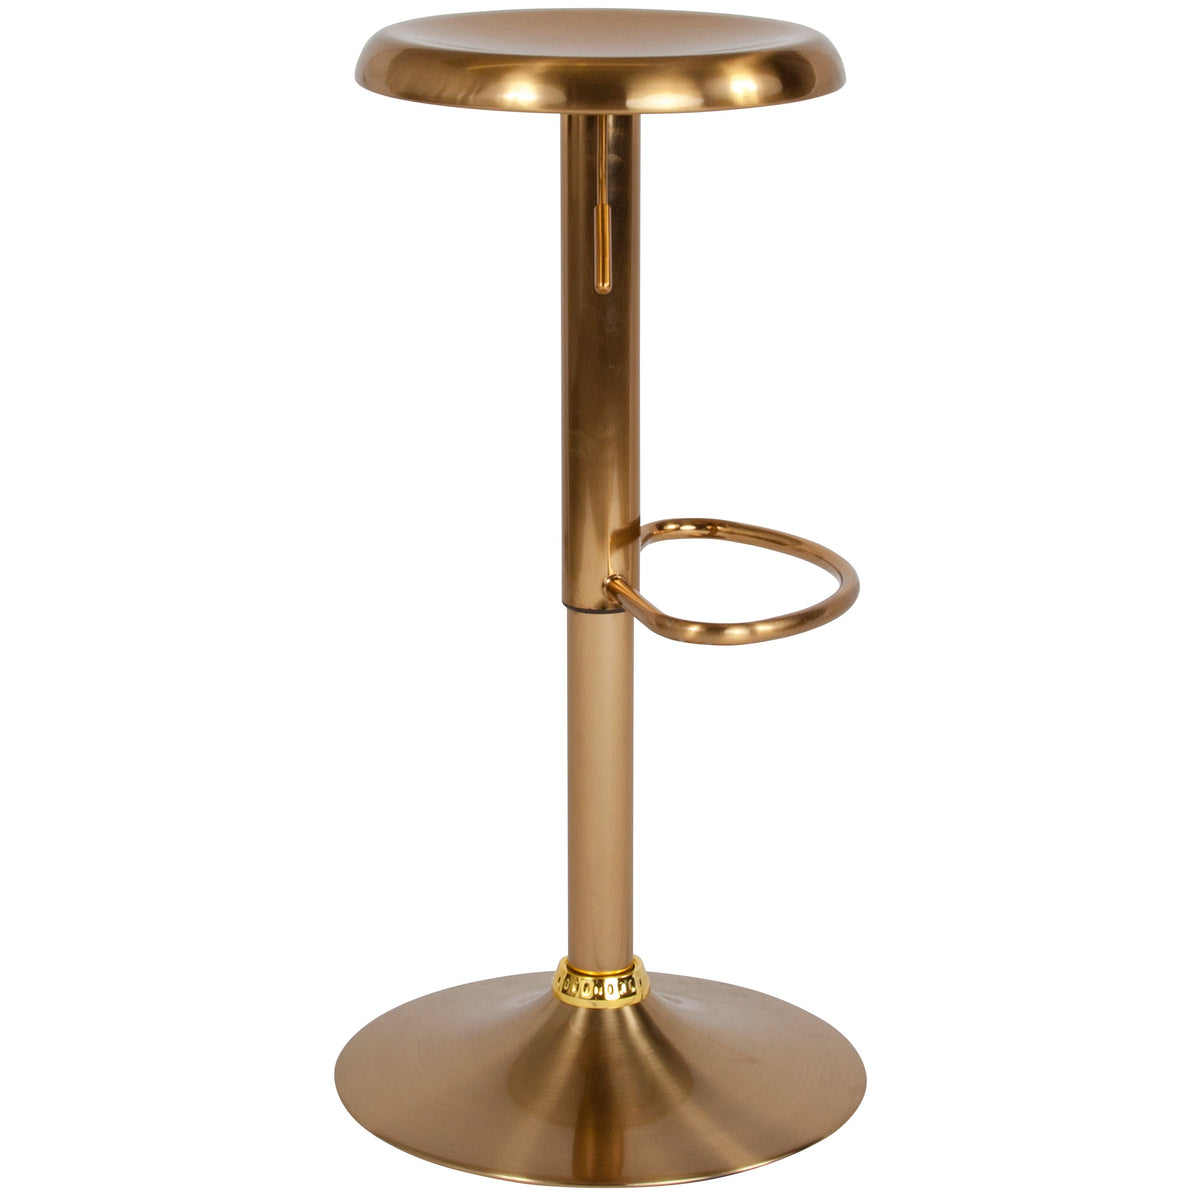 Gold |#| Adjustable Height Retro Barstool with Ergonomic Molded Seat in Gold Finish